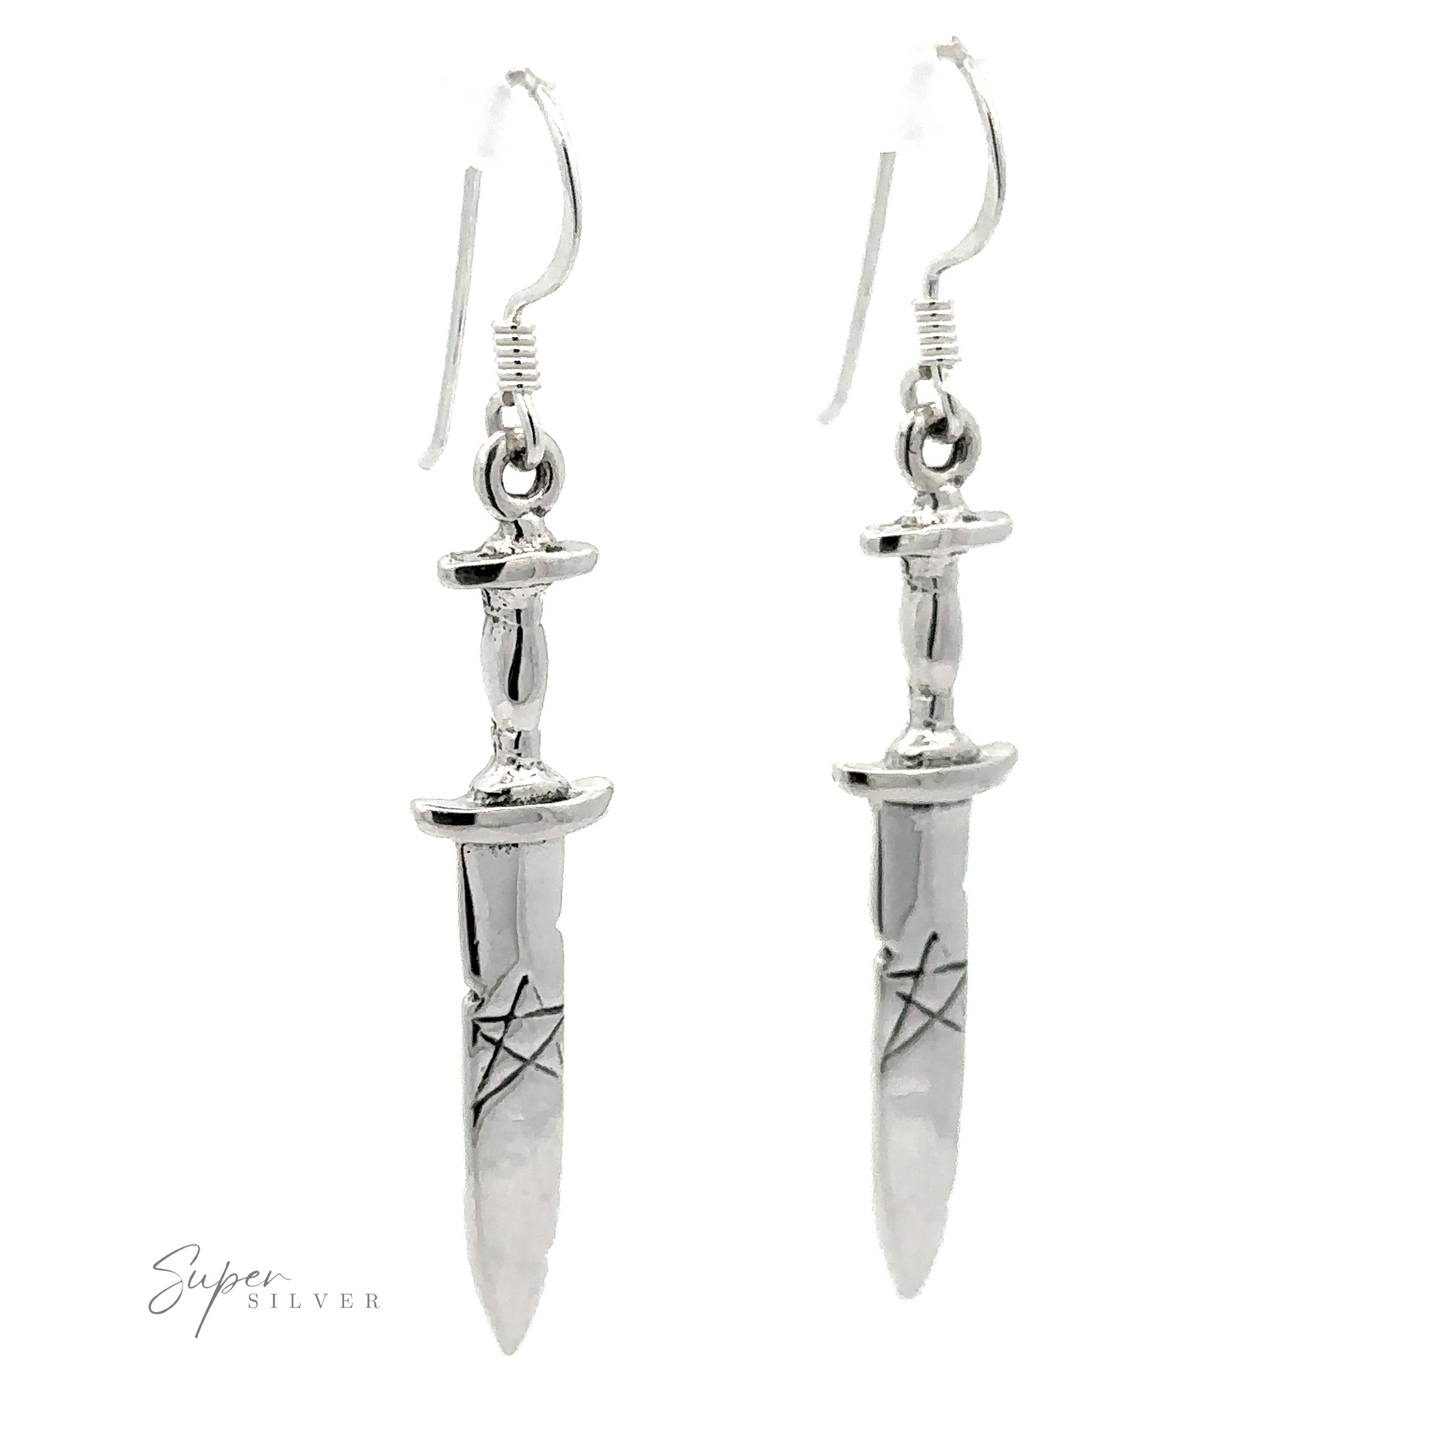 
                  
                    A pair of Dagger Earrings With Pentagram with intricate detailing and hooks for wearing, embodying a gothic style. The "Super Silver" logo is visible in the lower left corner.
                  
                